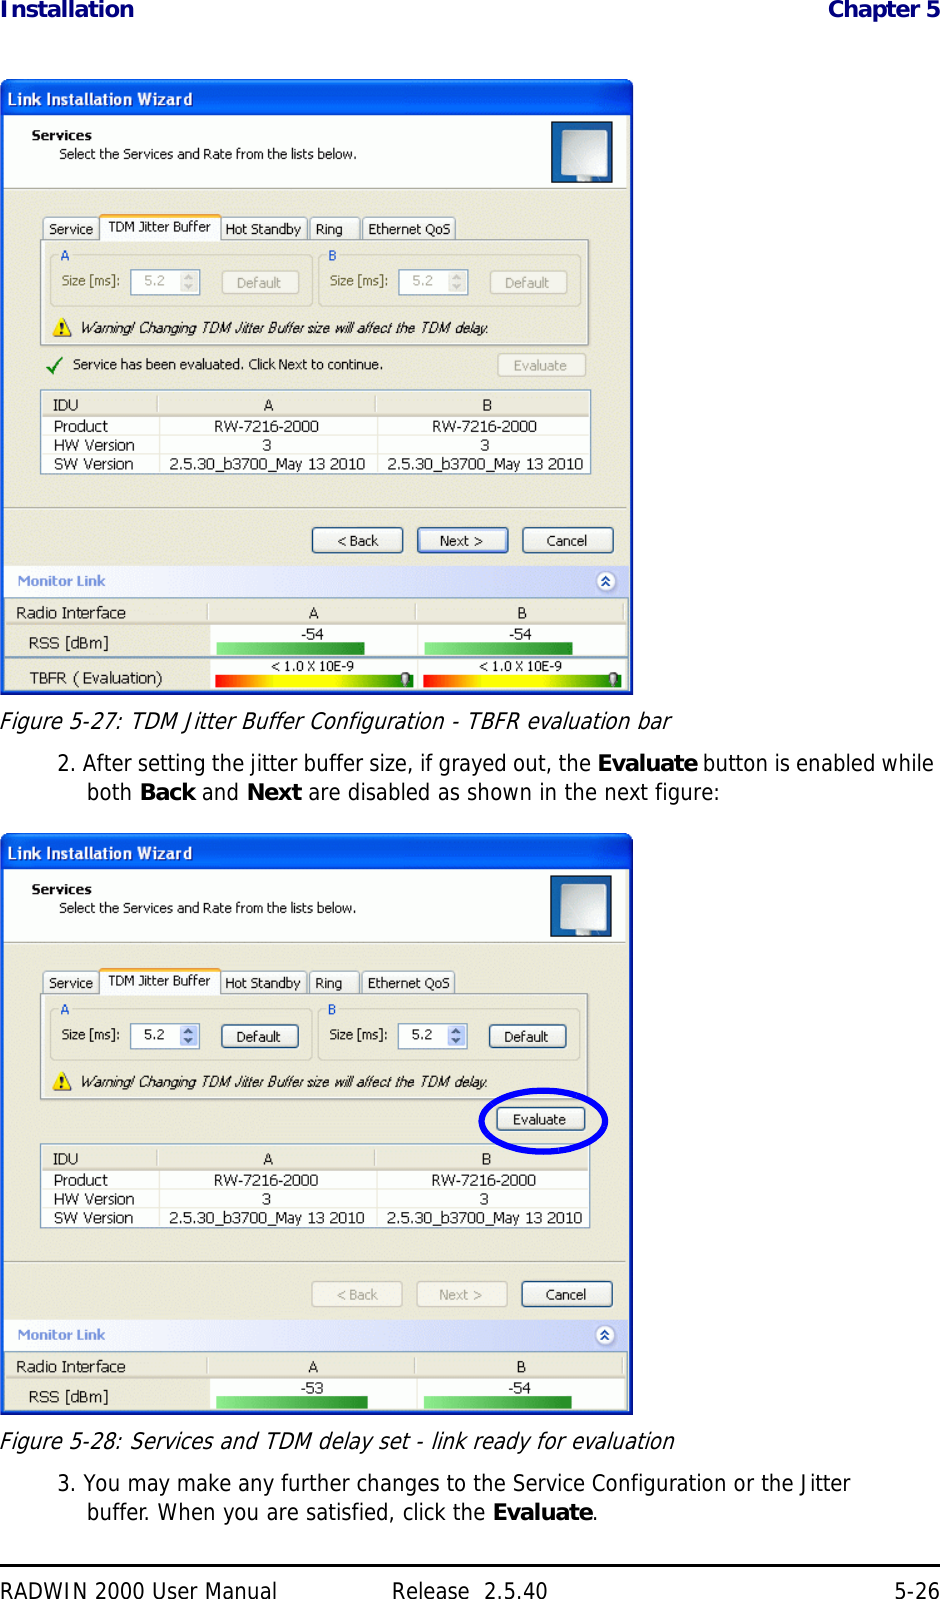 Installation Chapter 5RADWIN 2000 User Manual Release  2.5.40 5-26Figure 5-27: TDM Jitter Buffer Configuration - TBFR evaluation bar2. After setting the jitter buffer size, if grayed out, the Evaluate button is enabled while both Back and Next are disabled as shown in the next figure:Figure 5-28: Services and TDM delay set - link ready for evaluation3. You may make any further changes to the Service Configuration or the Jitter buffer. When you are satisfied, click the Evaluate.